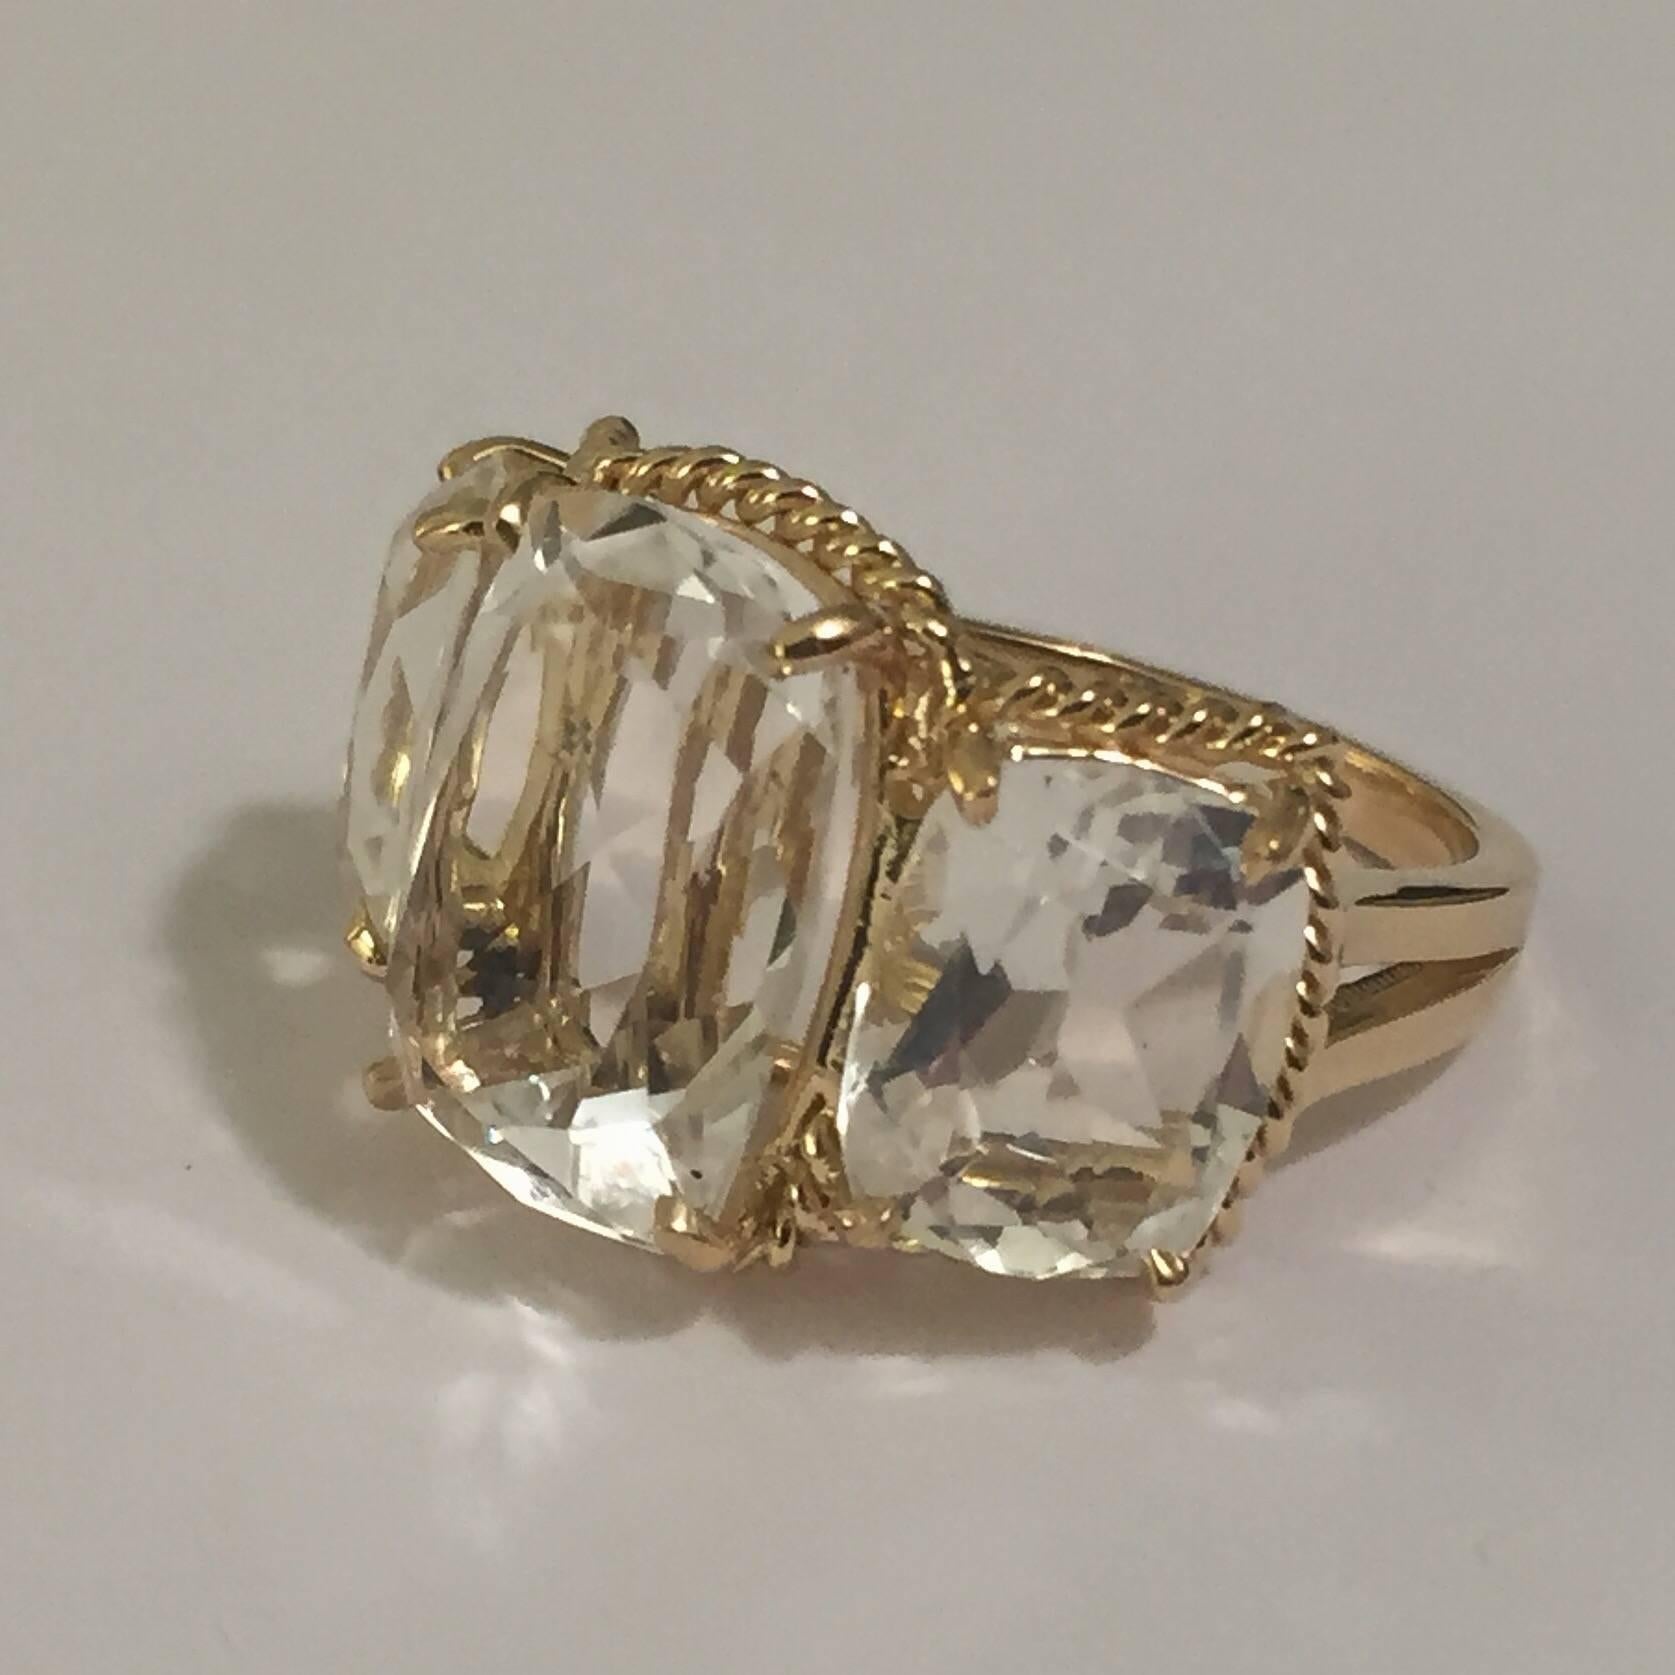 Elegant 18kt Yellow Gold Three Stone Ring with Rope Twist Border with split shank detail. The ring features three faceted cushion cut Rock Crystal stones surrounded by twisted gold rope. The center Rock Crystal stone measures 5/8